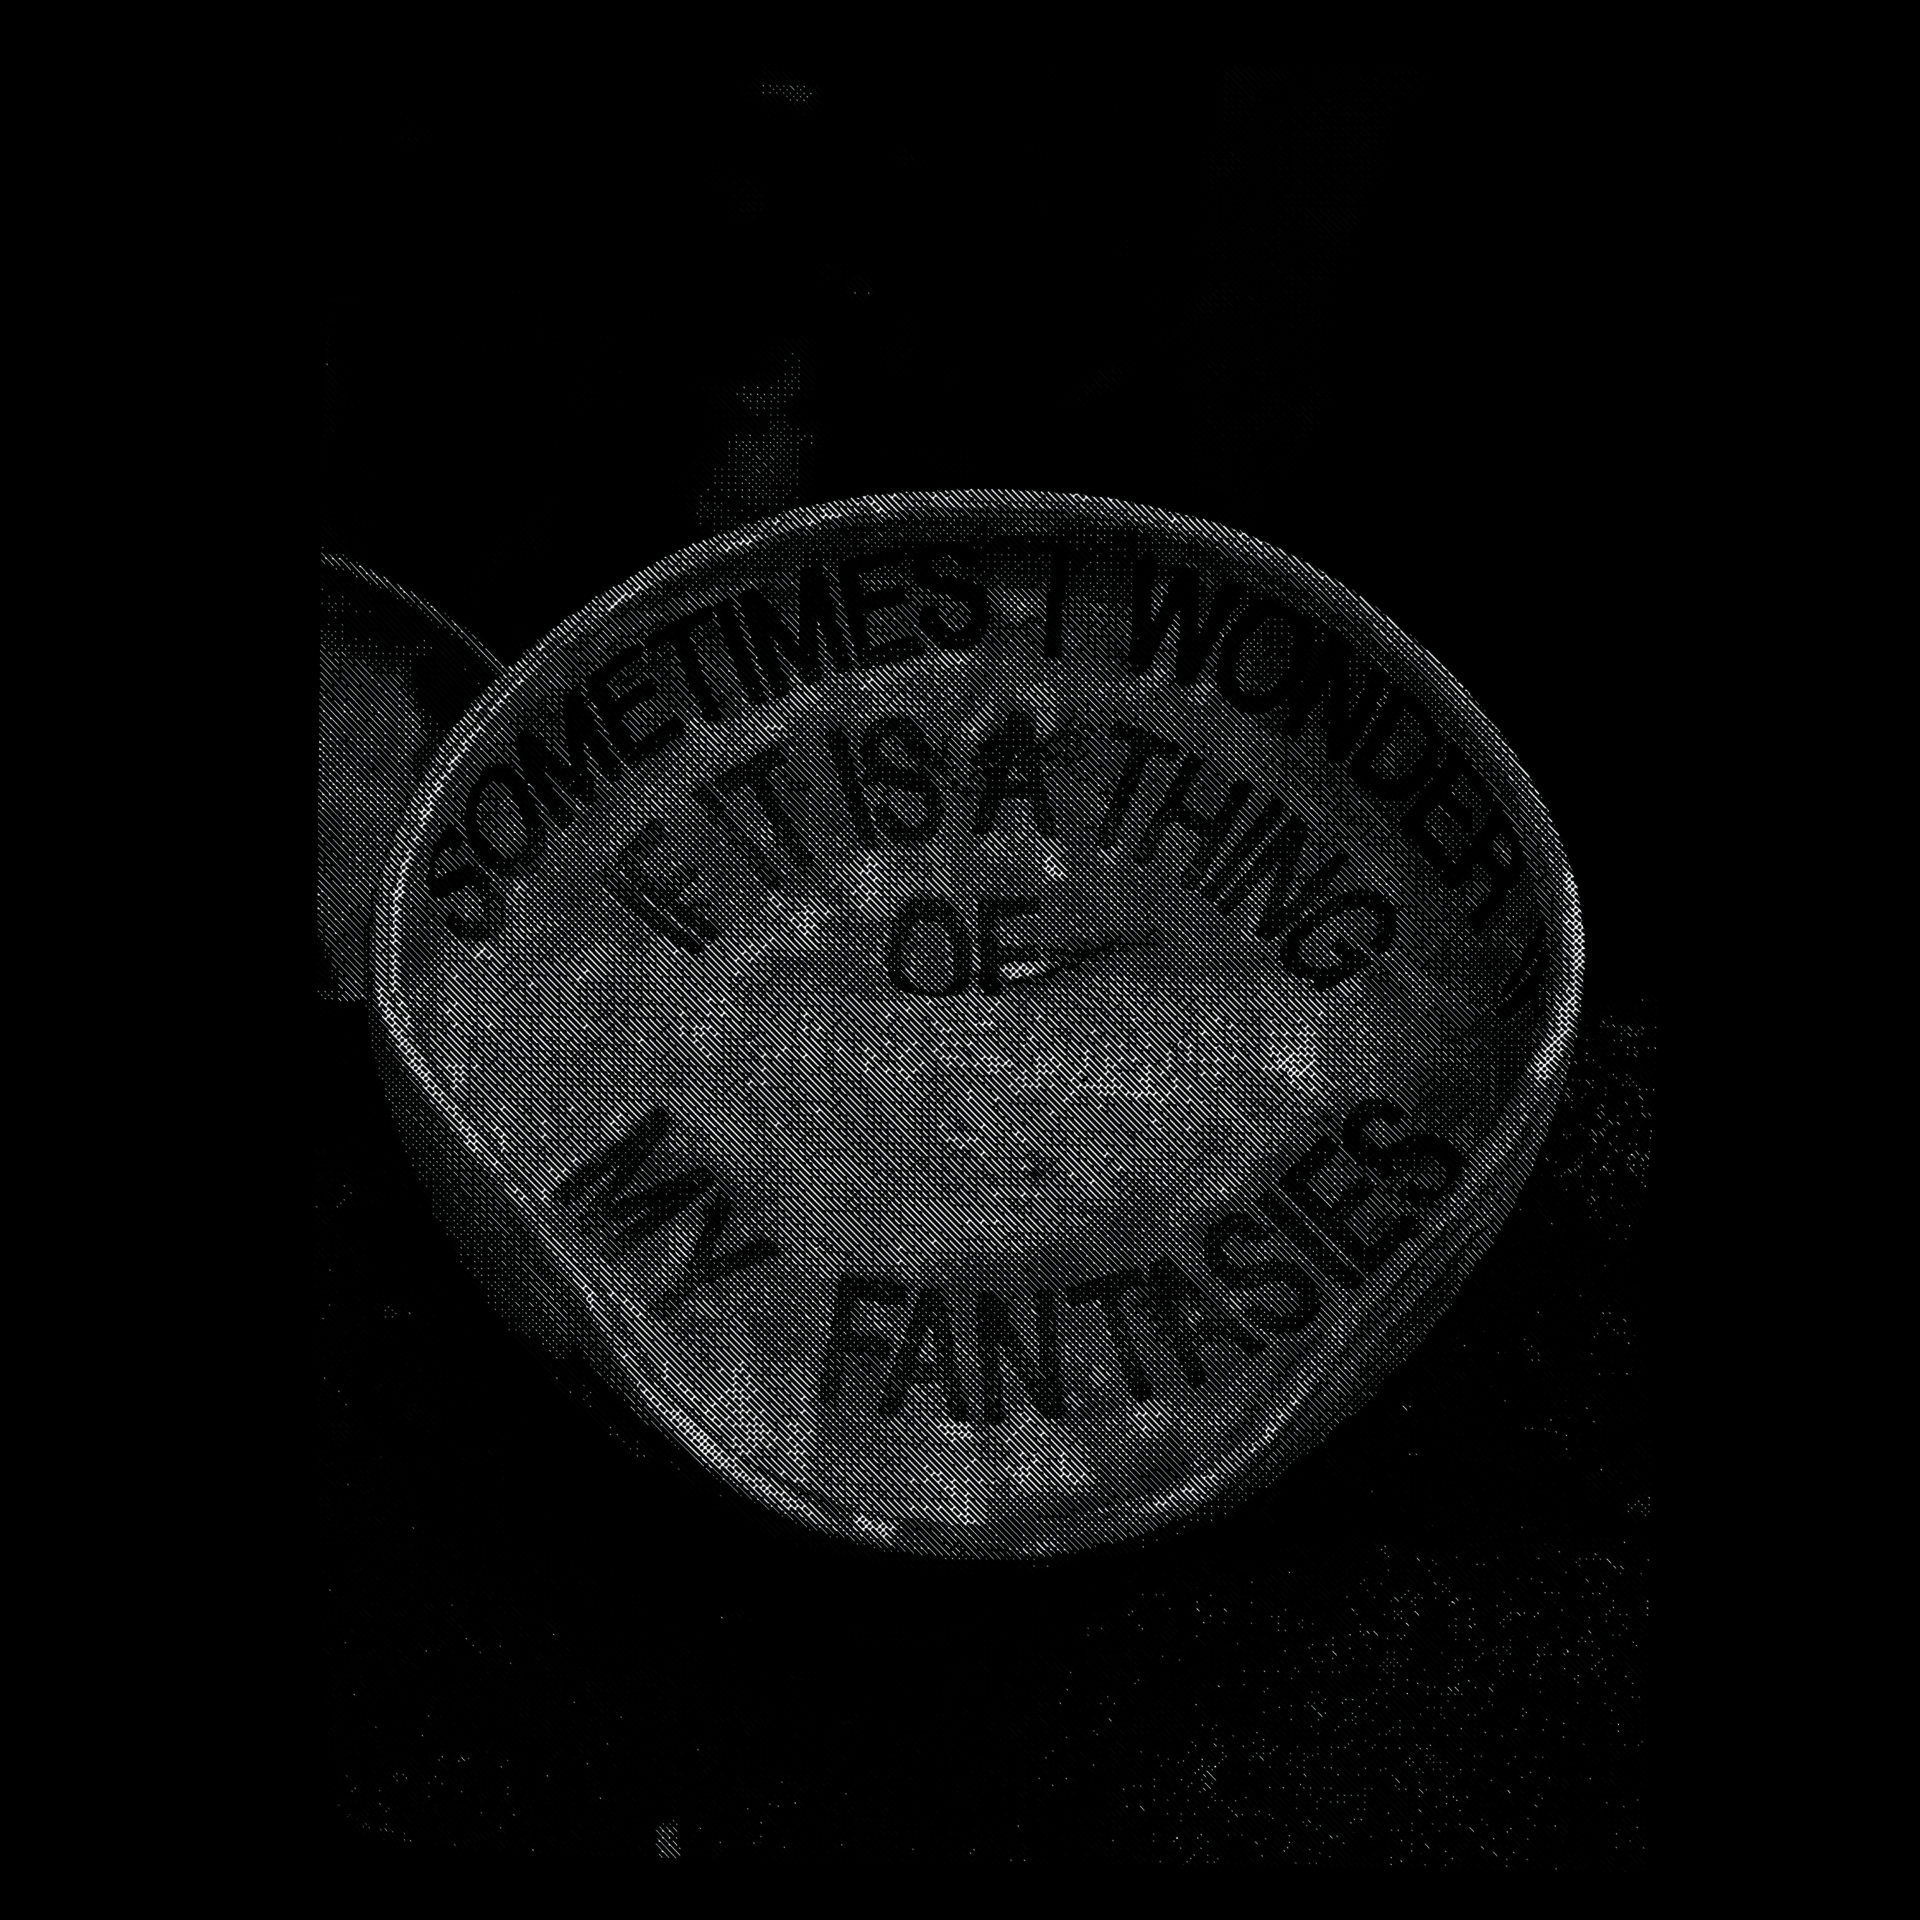 Black and white photograph of a ceramic vessel with the text 'SOMETIMES I WONDER IF IT IS A THING OF MY FANTASIES' printed in black